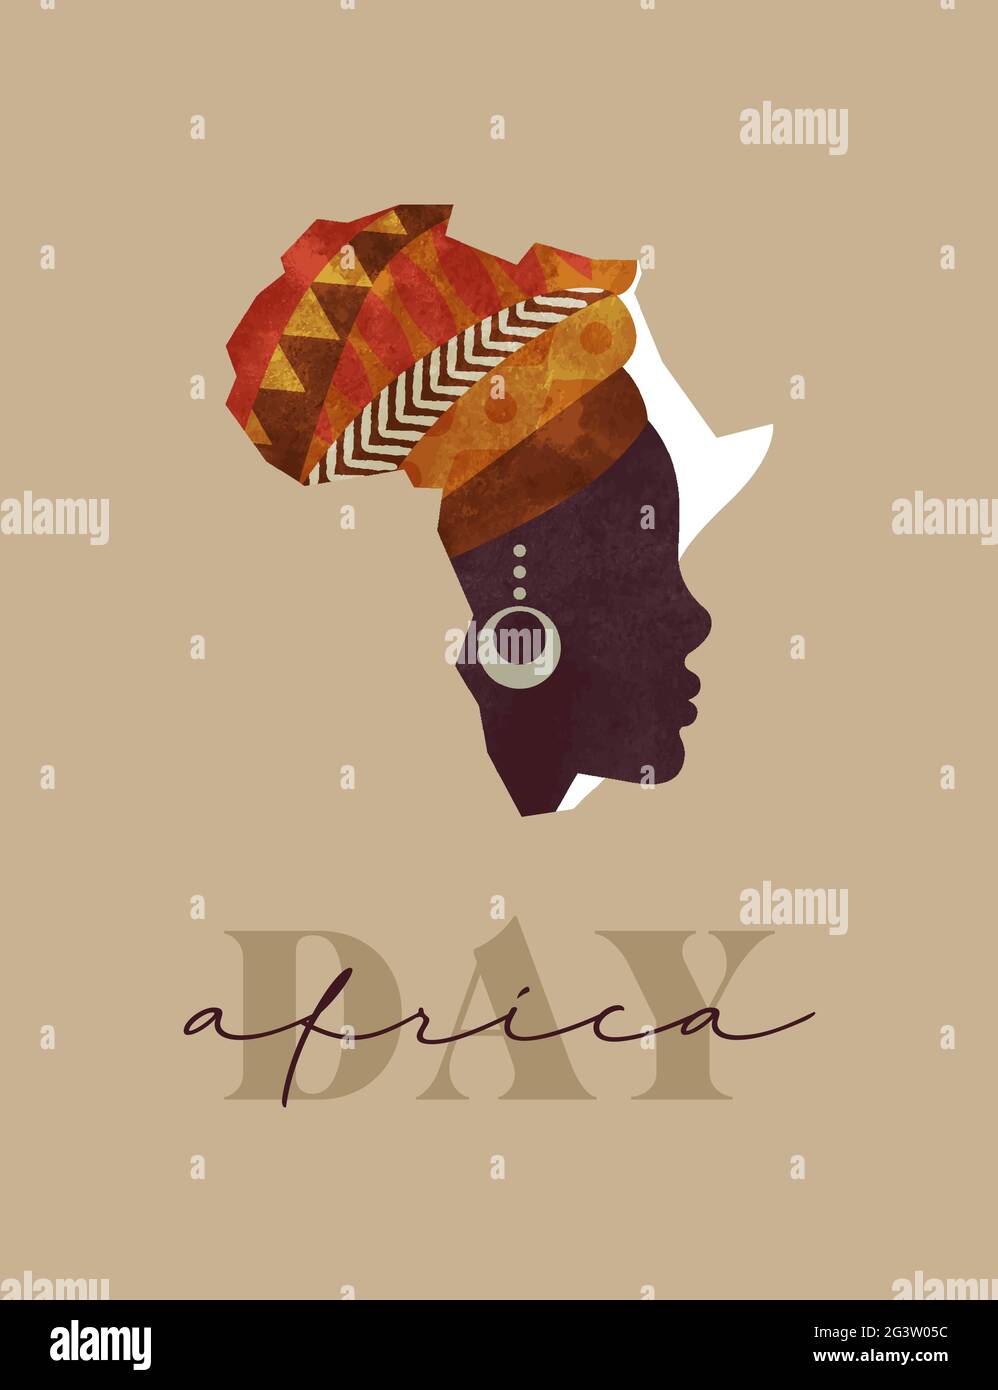 Africa Day greeting card illustration, african continent map made of beautiful black woman face with traditional tribal art head turban. May 25 holida Stock Vector